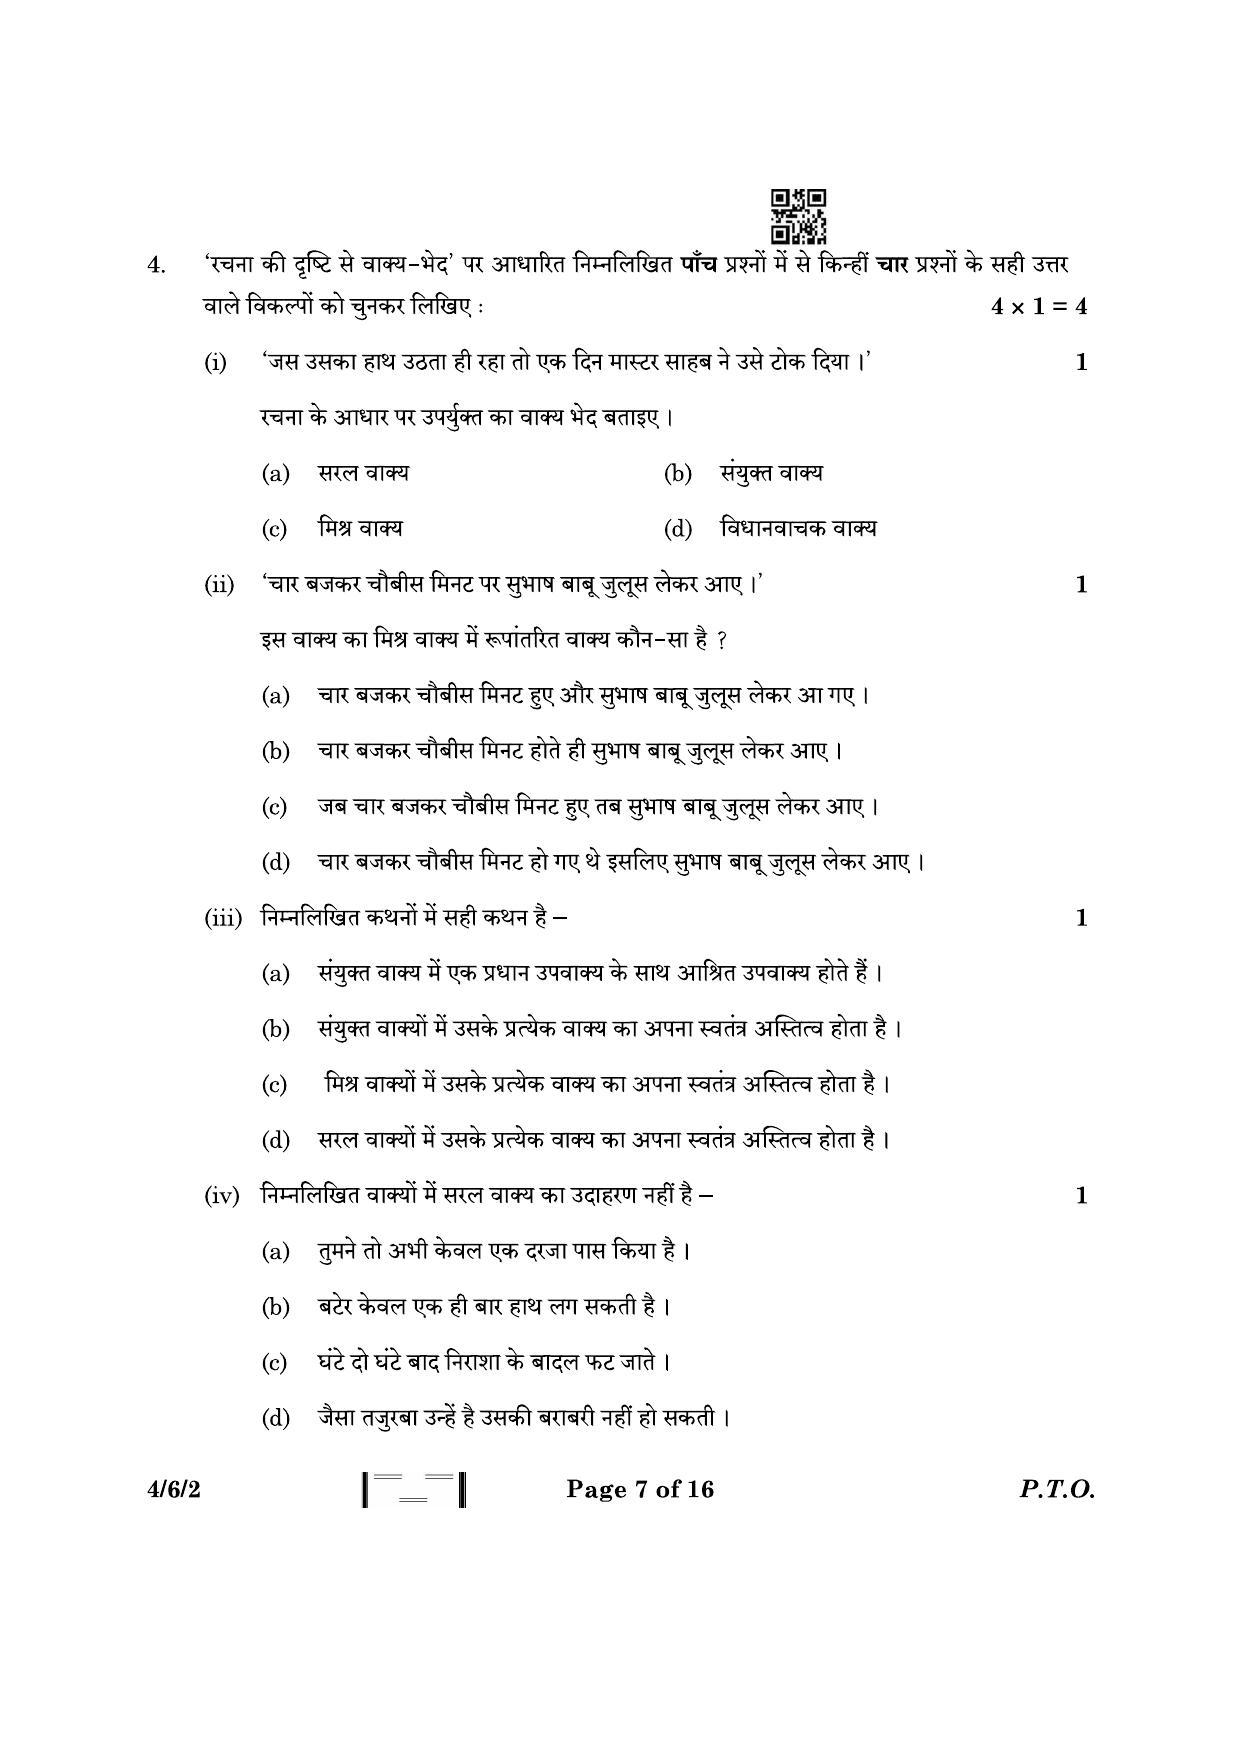 CBSE Class 10 4-6-2 Hindi B 2023 Question Paper - Page 7